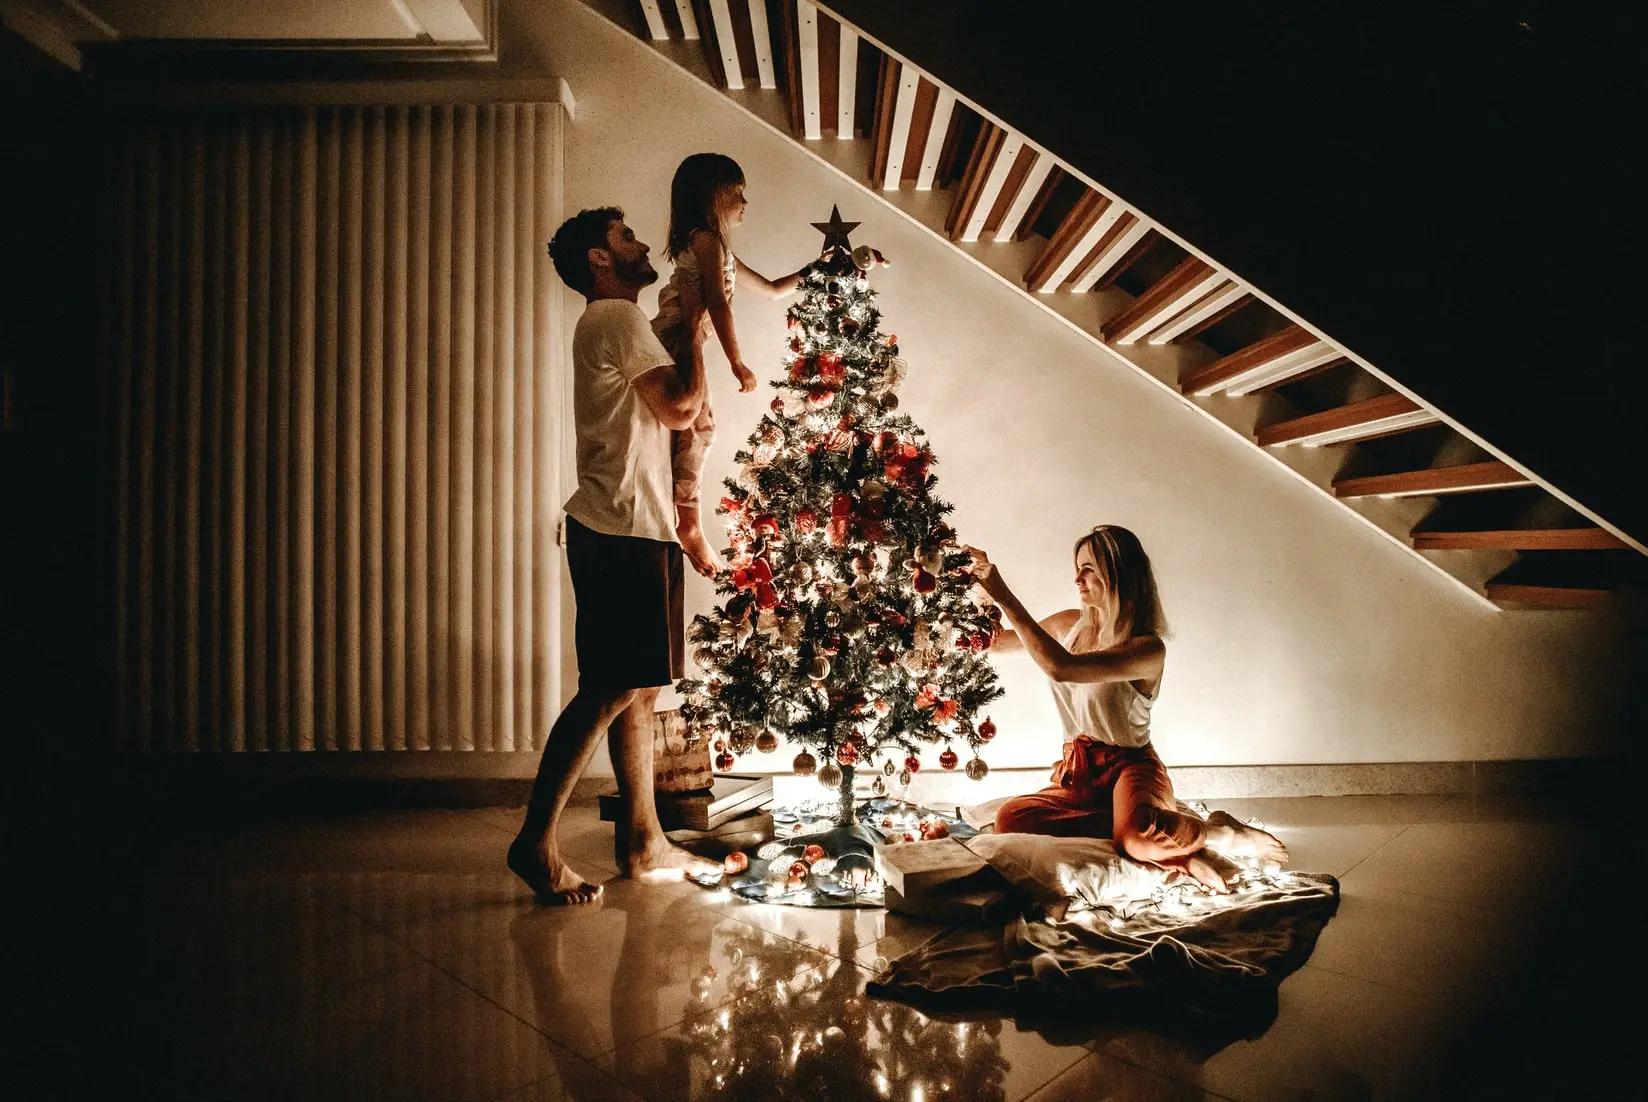 Connect with Family During the Holidays